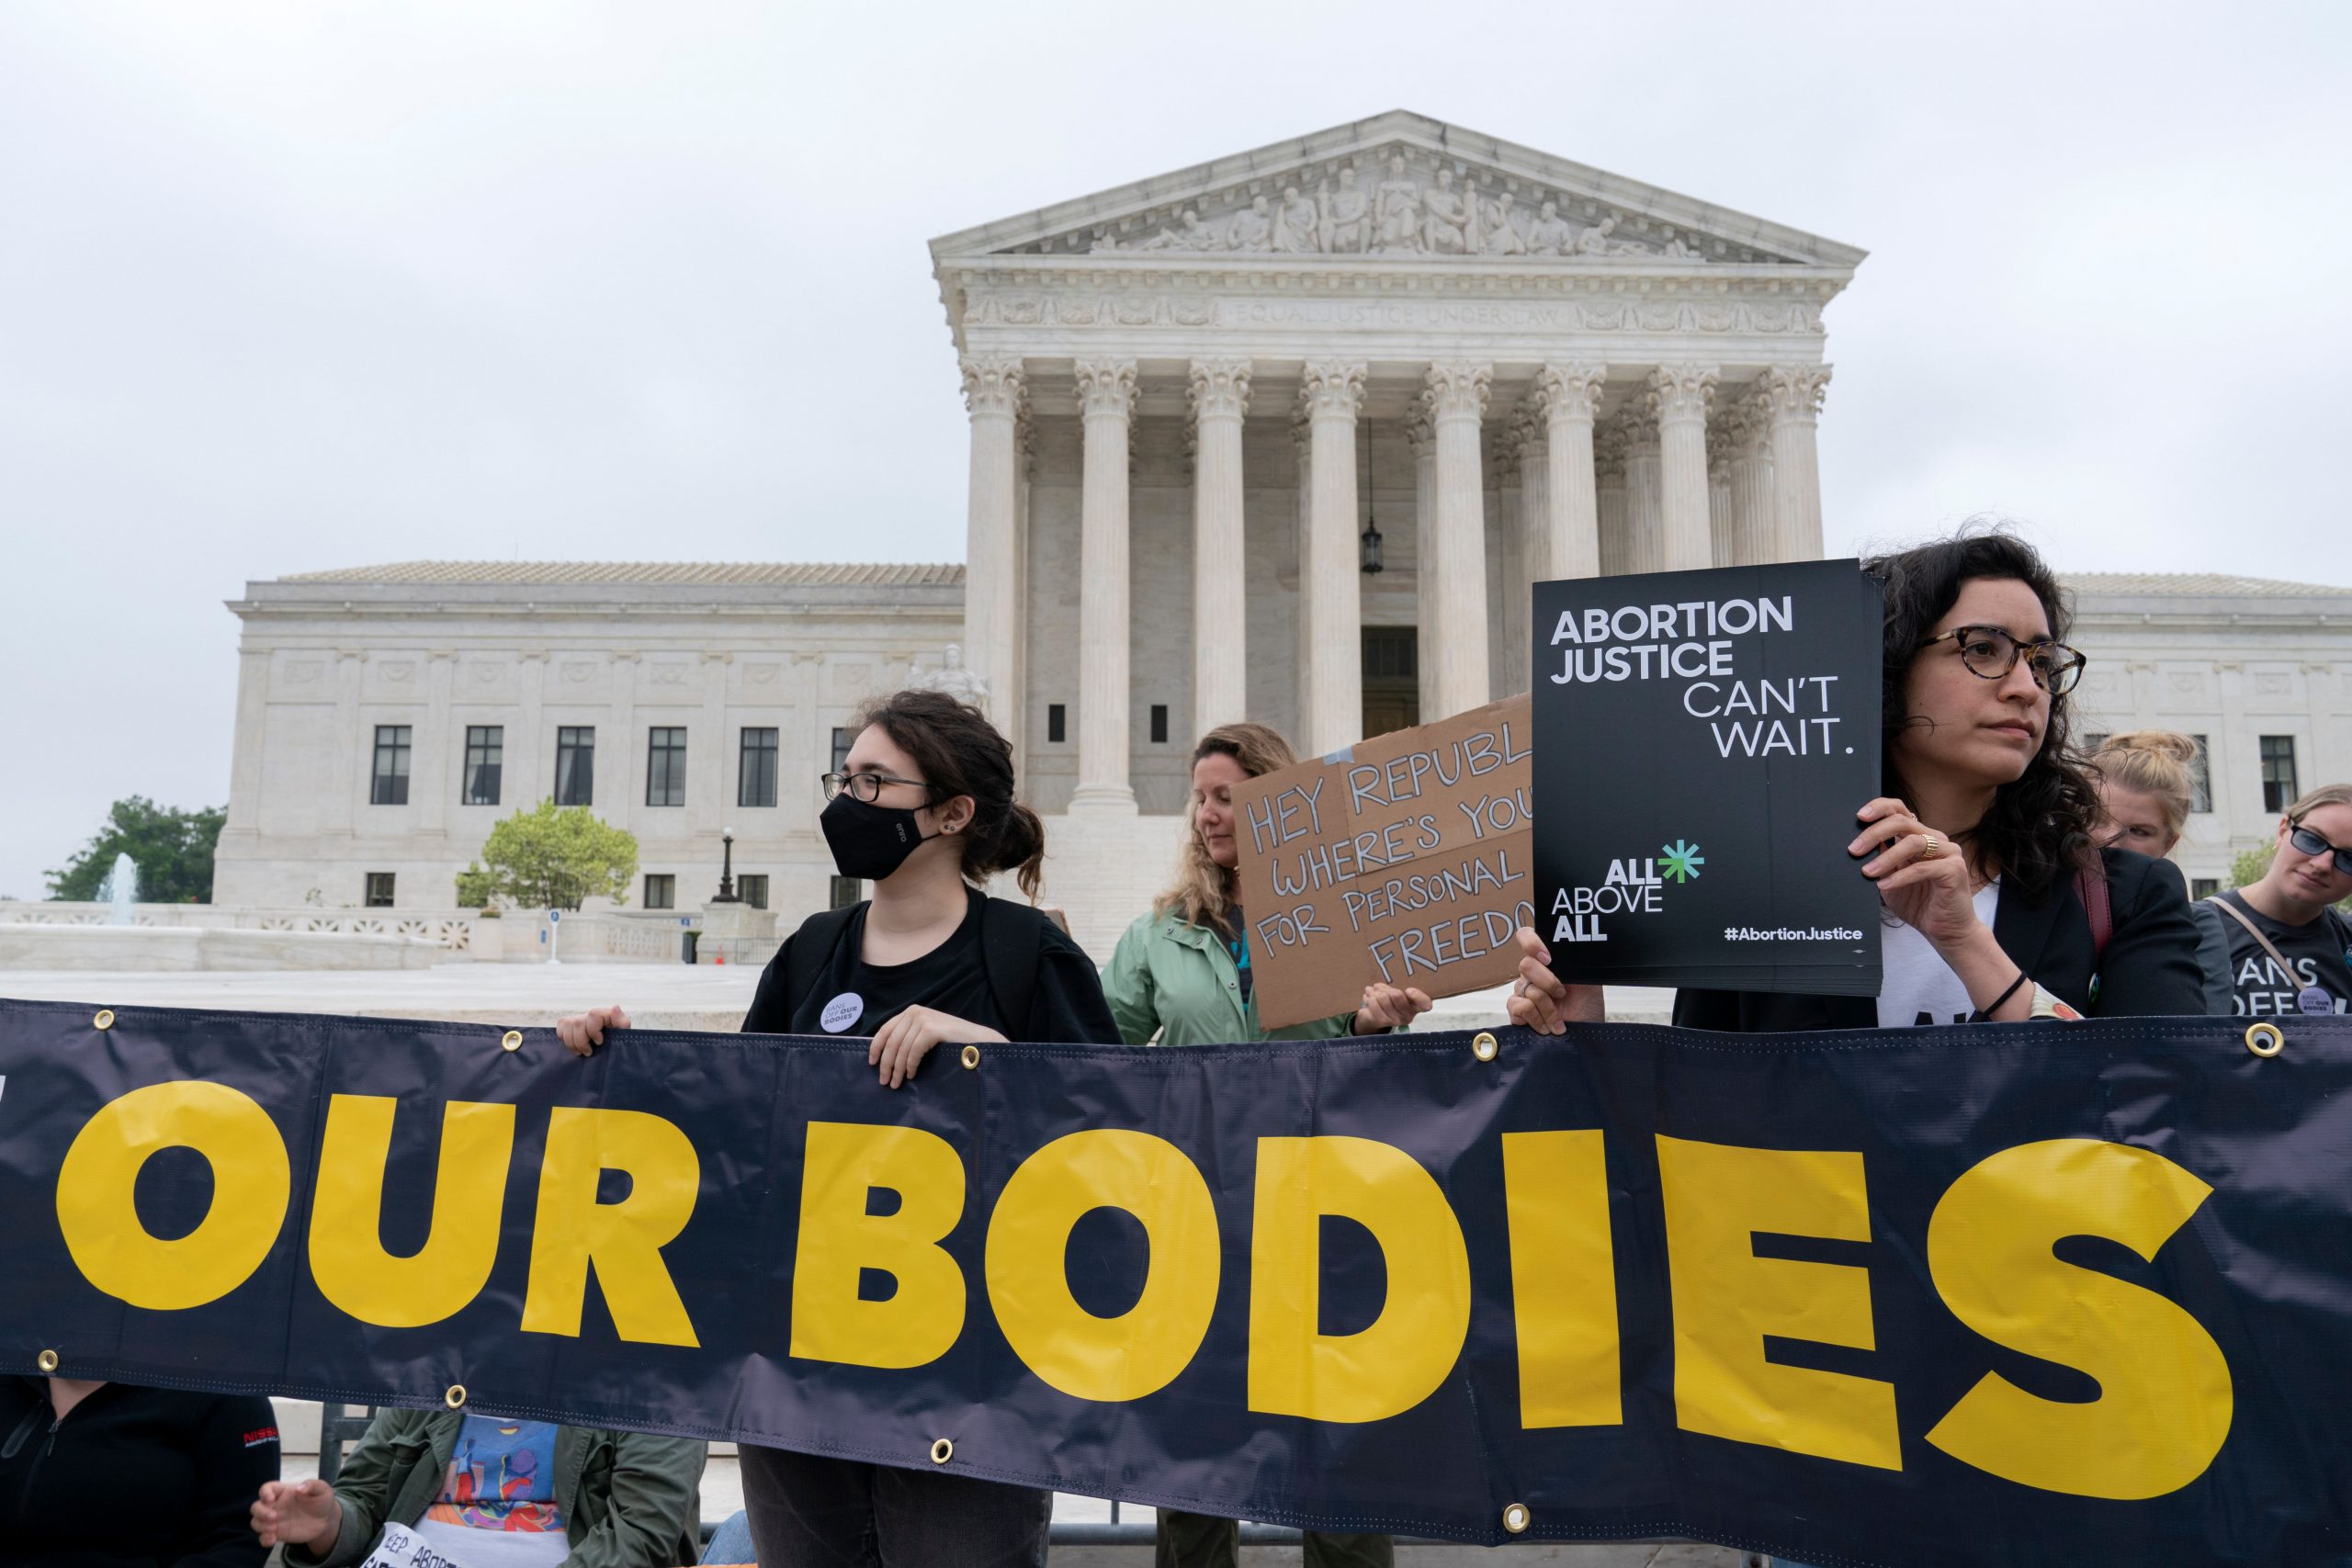 ‘Off our bodies’: The war cry of pro-Roe v Wade protestors in US